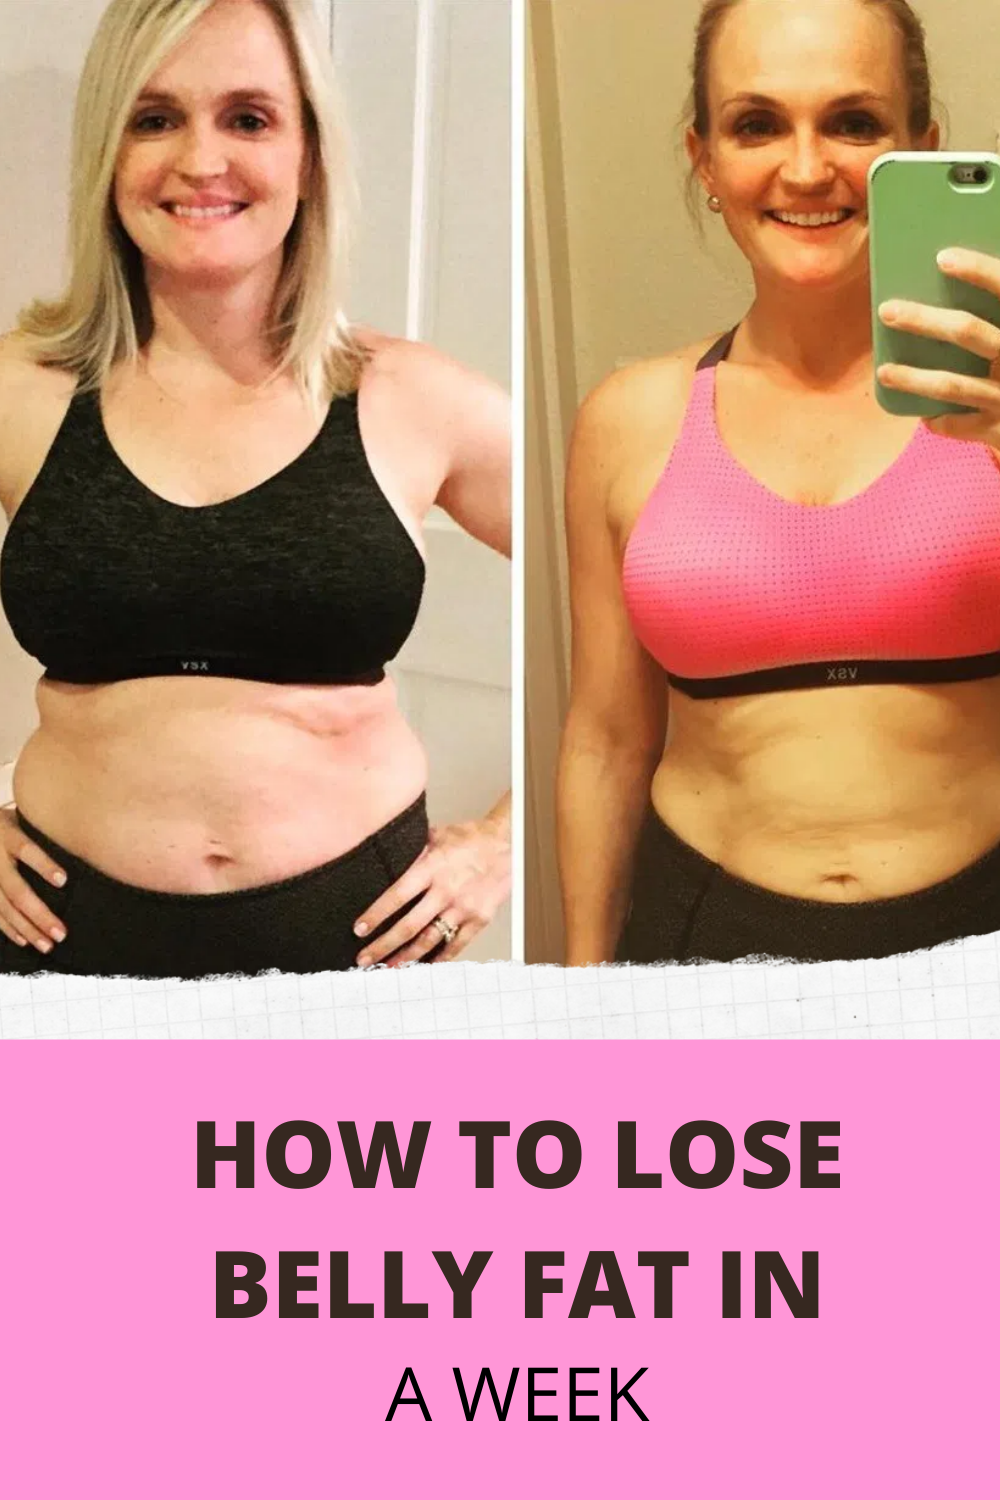 Marie Levato: HOW TO LOSE BELLY FAT IN A WEEK